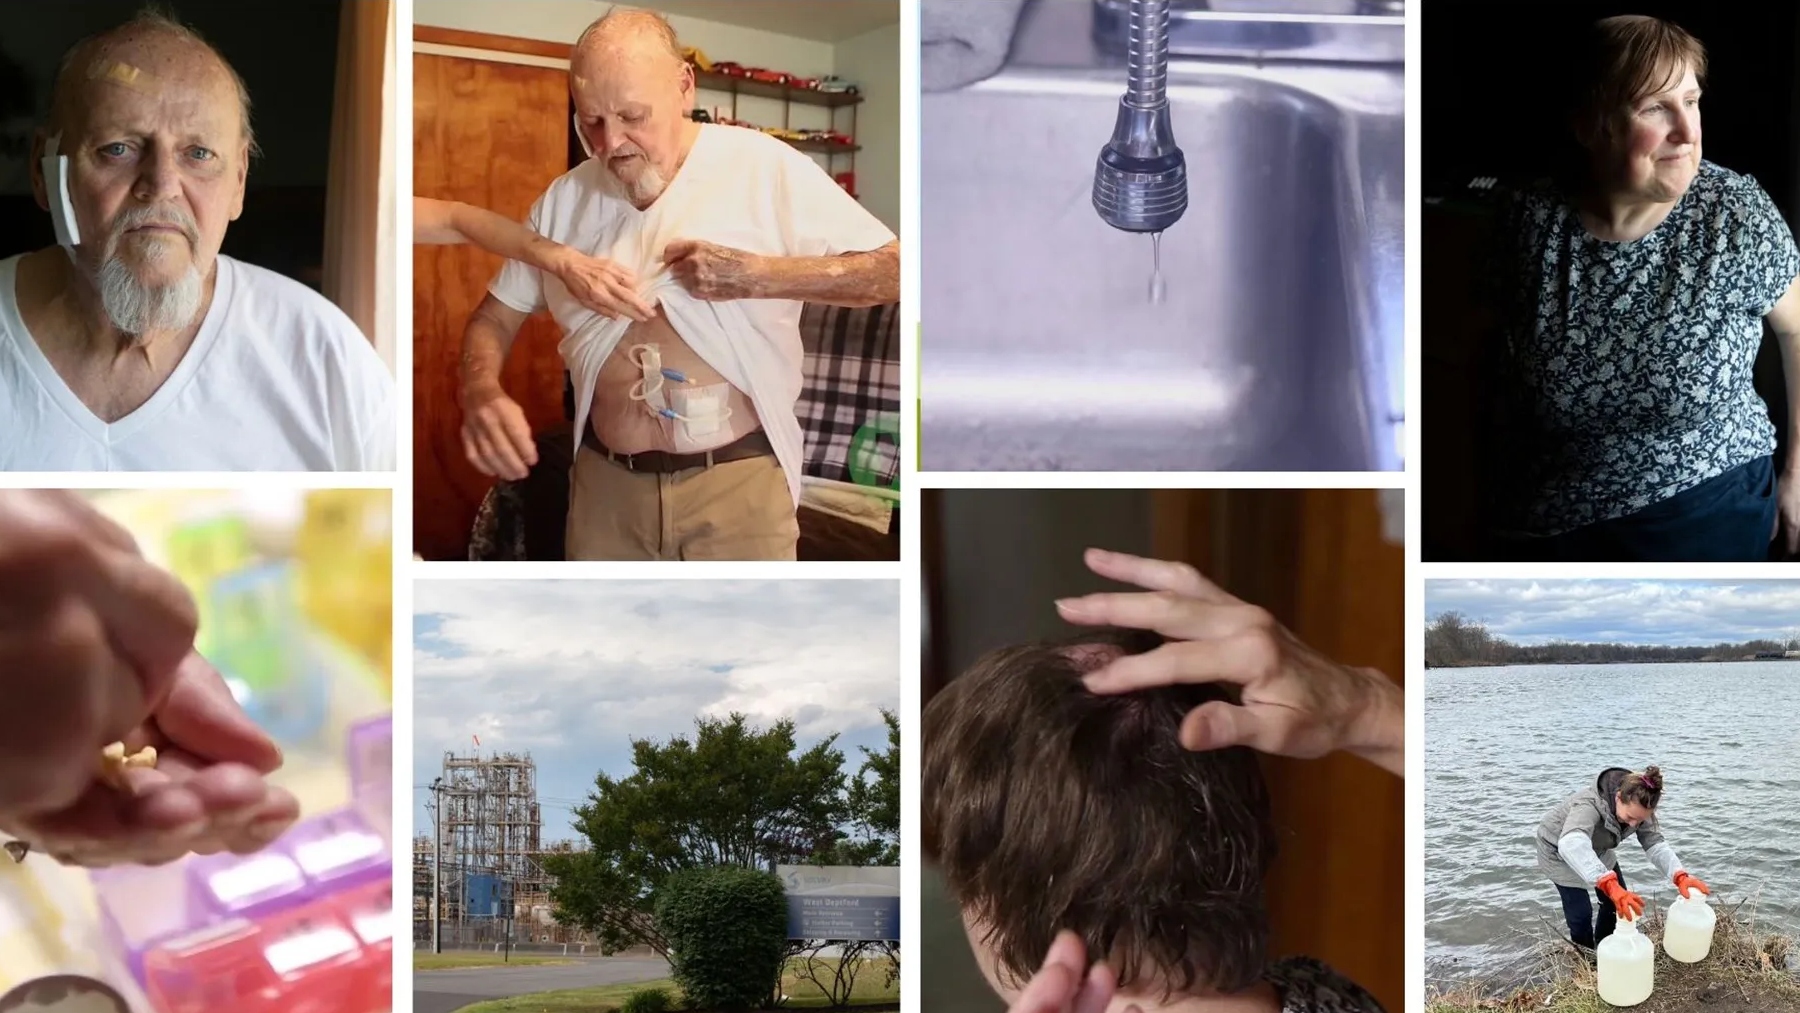 A series of six photos show a man with injuries, a tap, a woman, someone looking at a person's hair, a woman collecting water, a person holding pills, and an industrial facility.